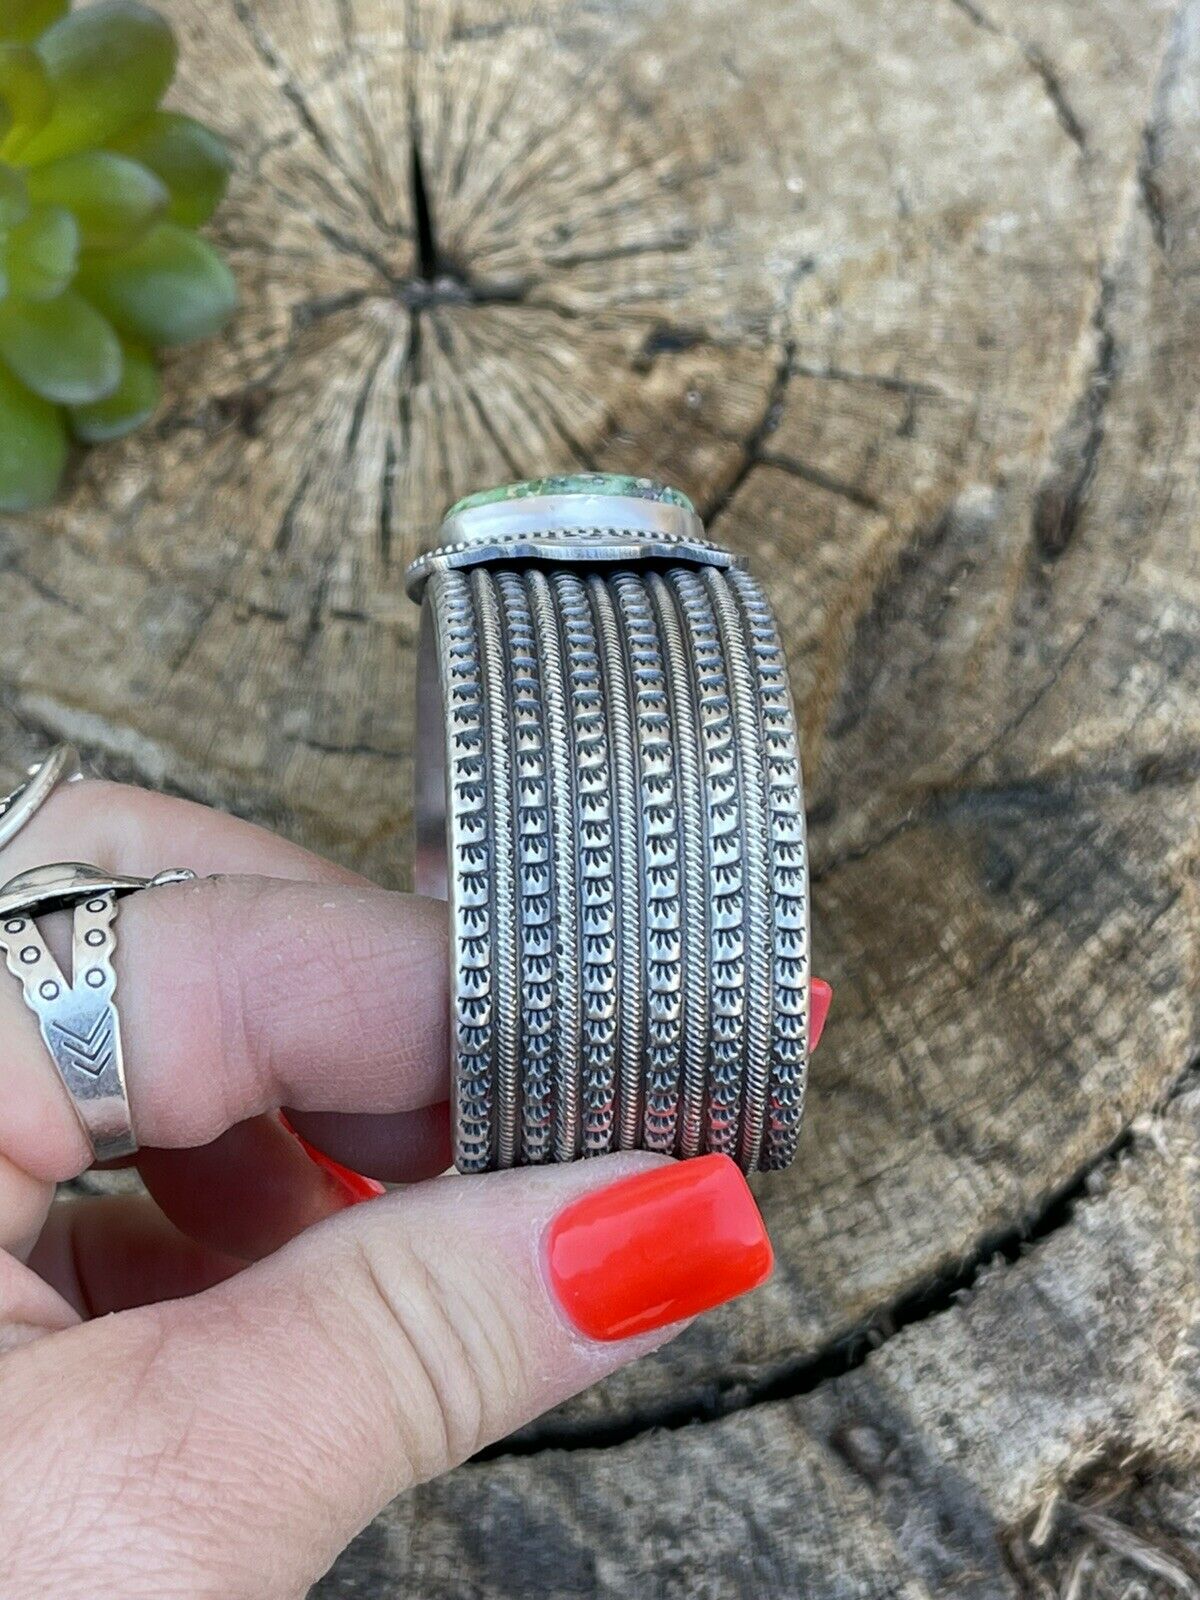 Navajo Sterling Silver & Sonoran Gold Turquoise Cuff Bracelet Signed & Stamped